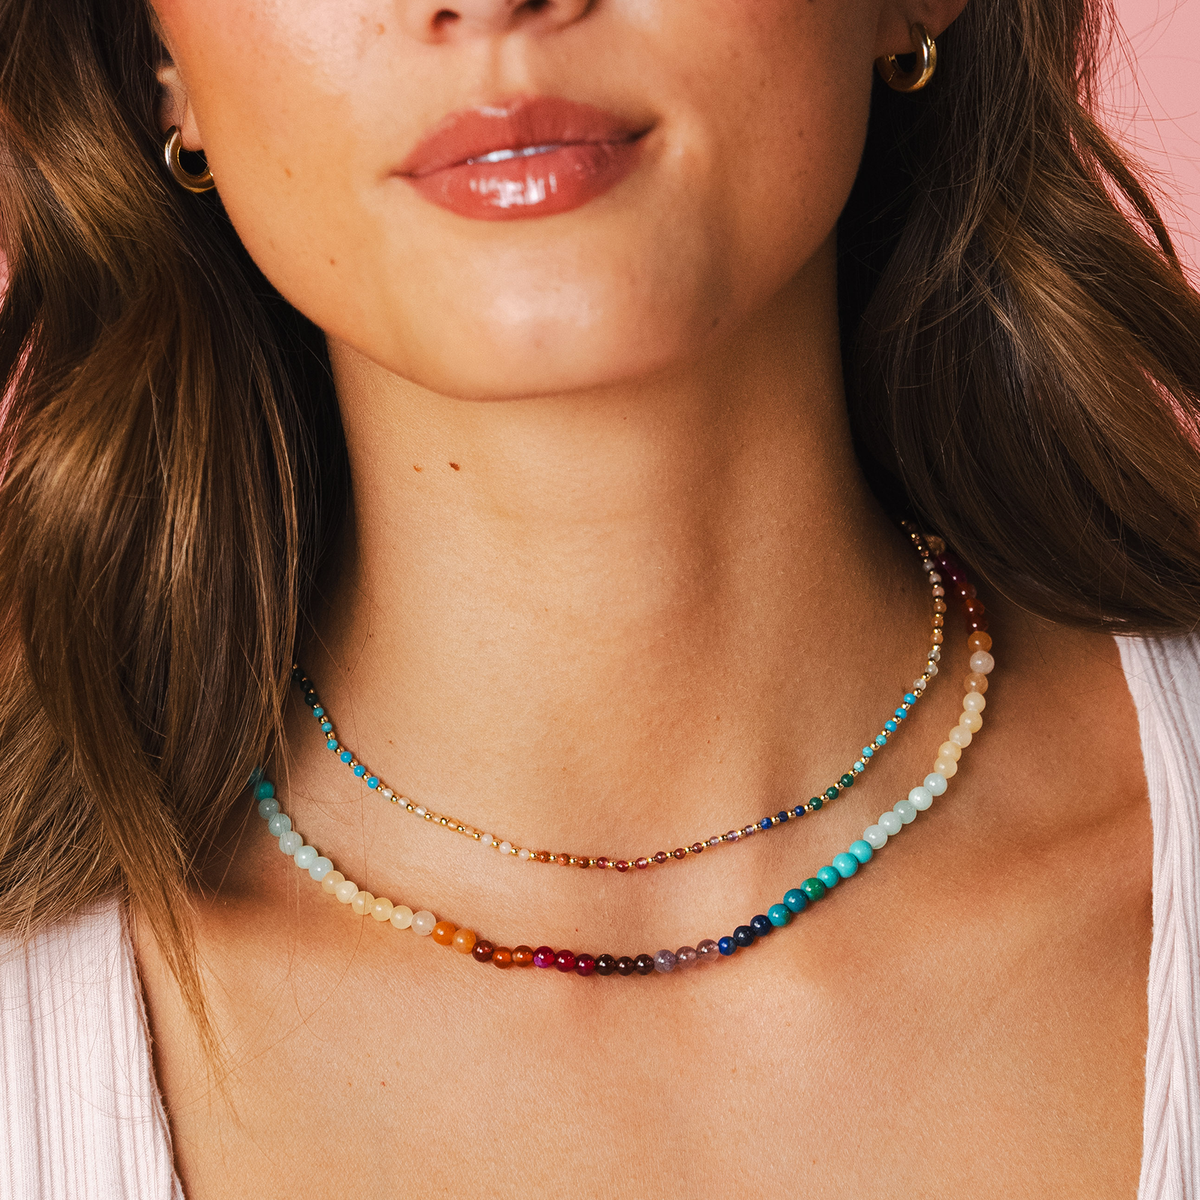 Model wearing a necklace stack. The necklaces include a 4mm multicolor stone healing necklace and a 2mm multicolor stone and gold bead healing necklace